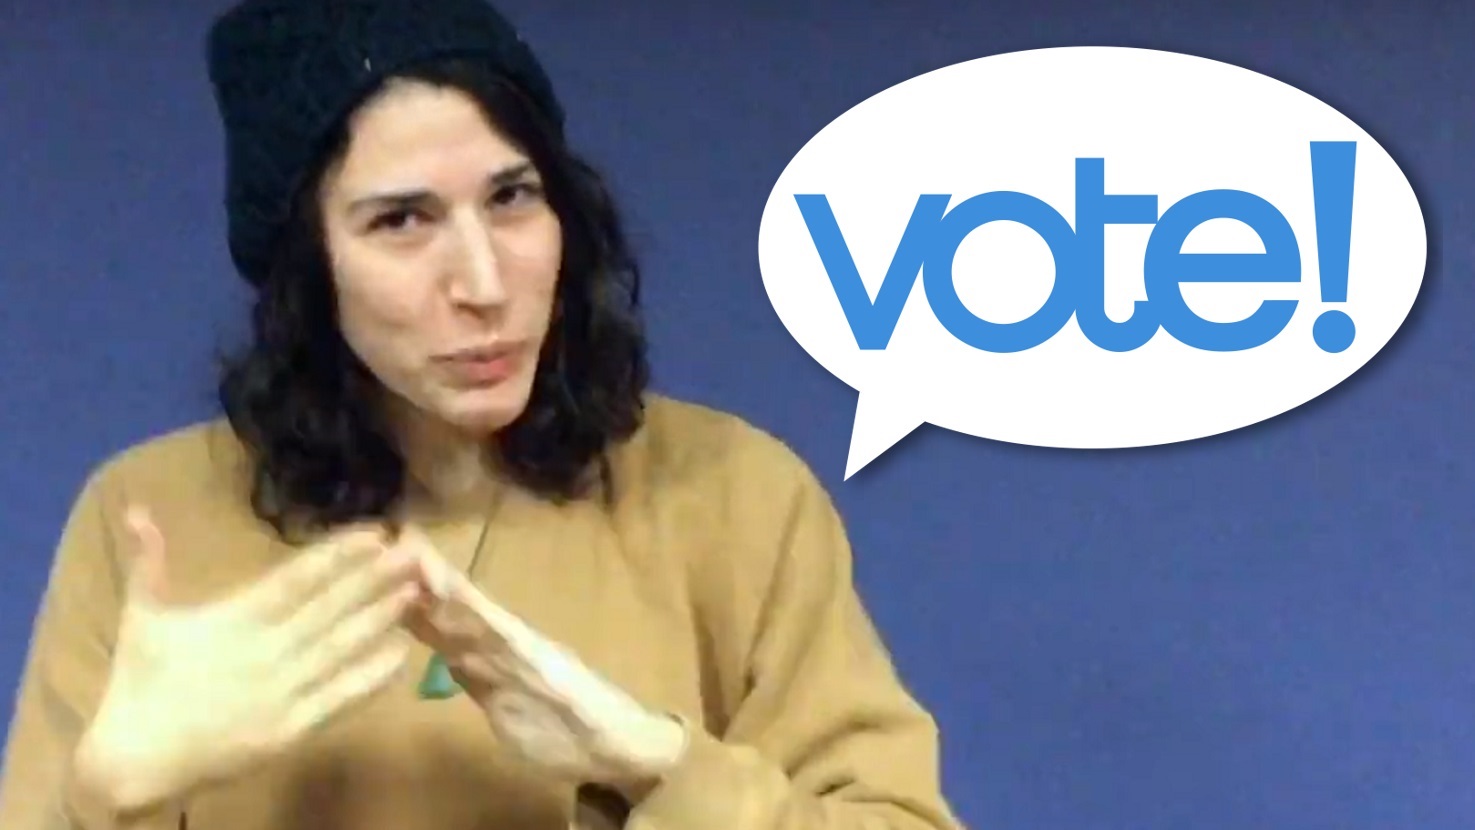 A thumbnail for a video. On the left, a light-skinned feminine-presenting person is signing the ASL word "community". On the right is a speech bubble that says "vote!".